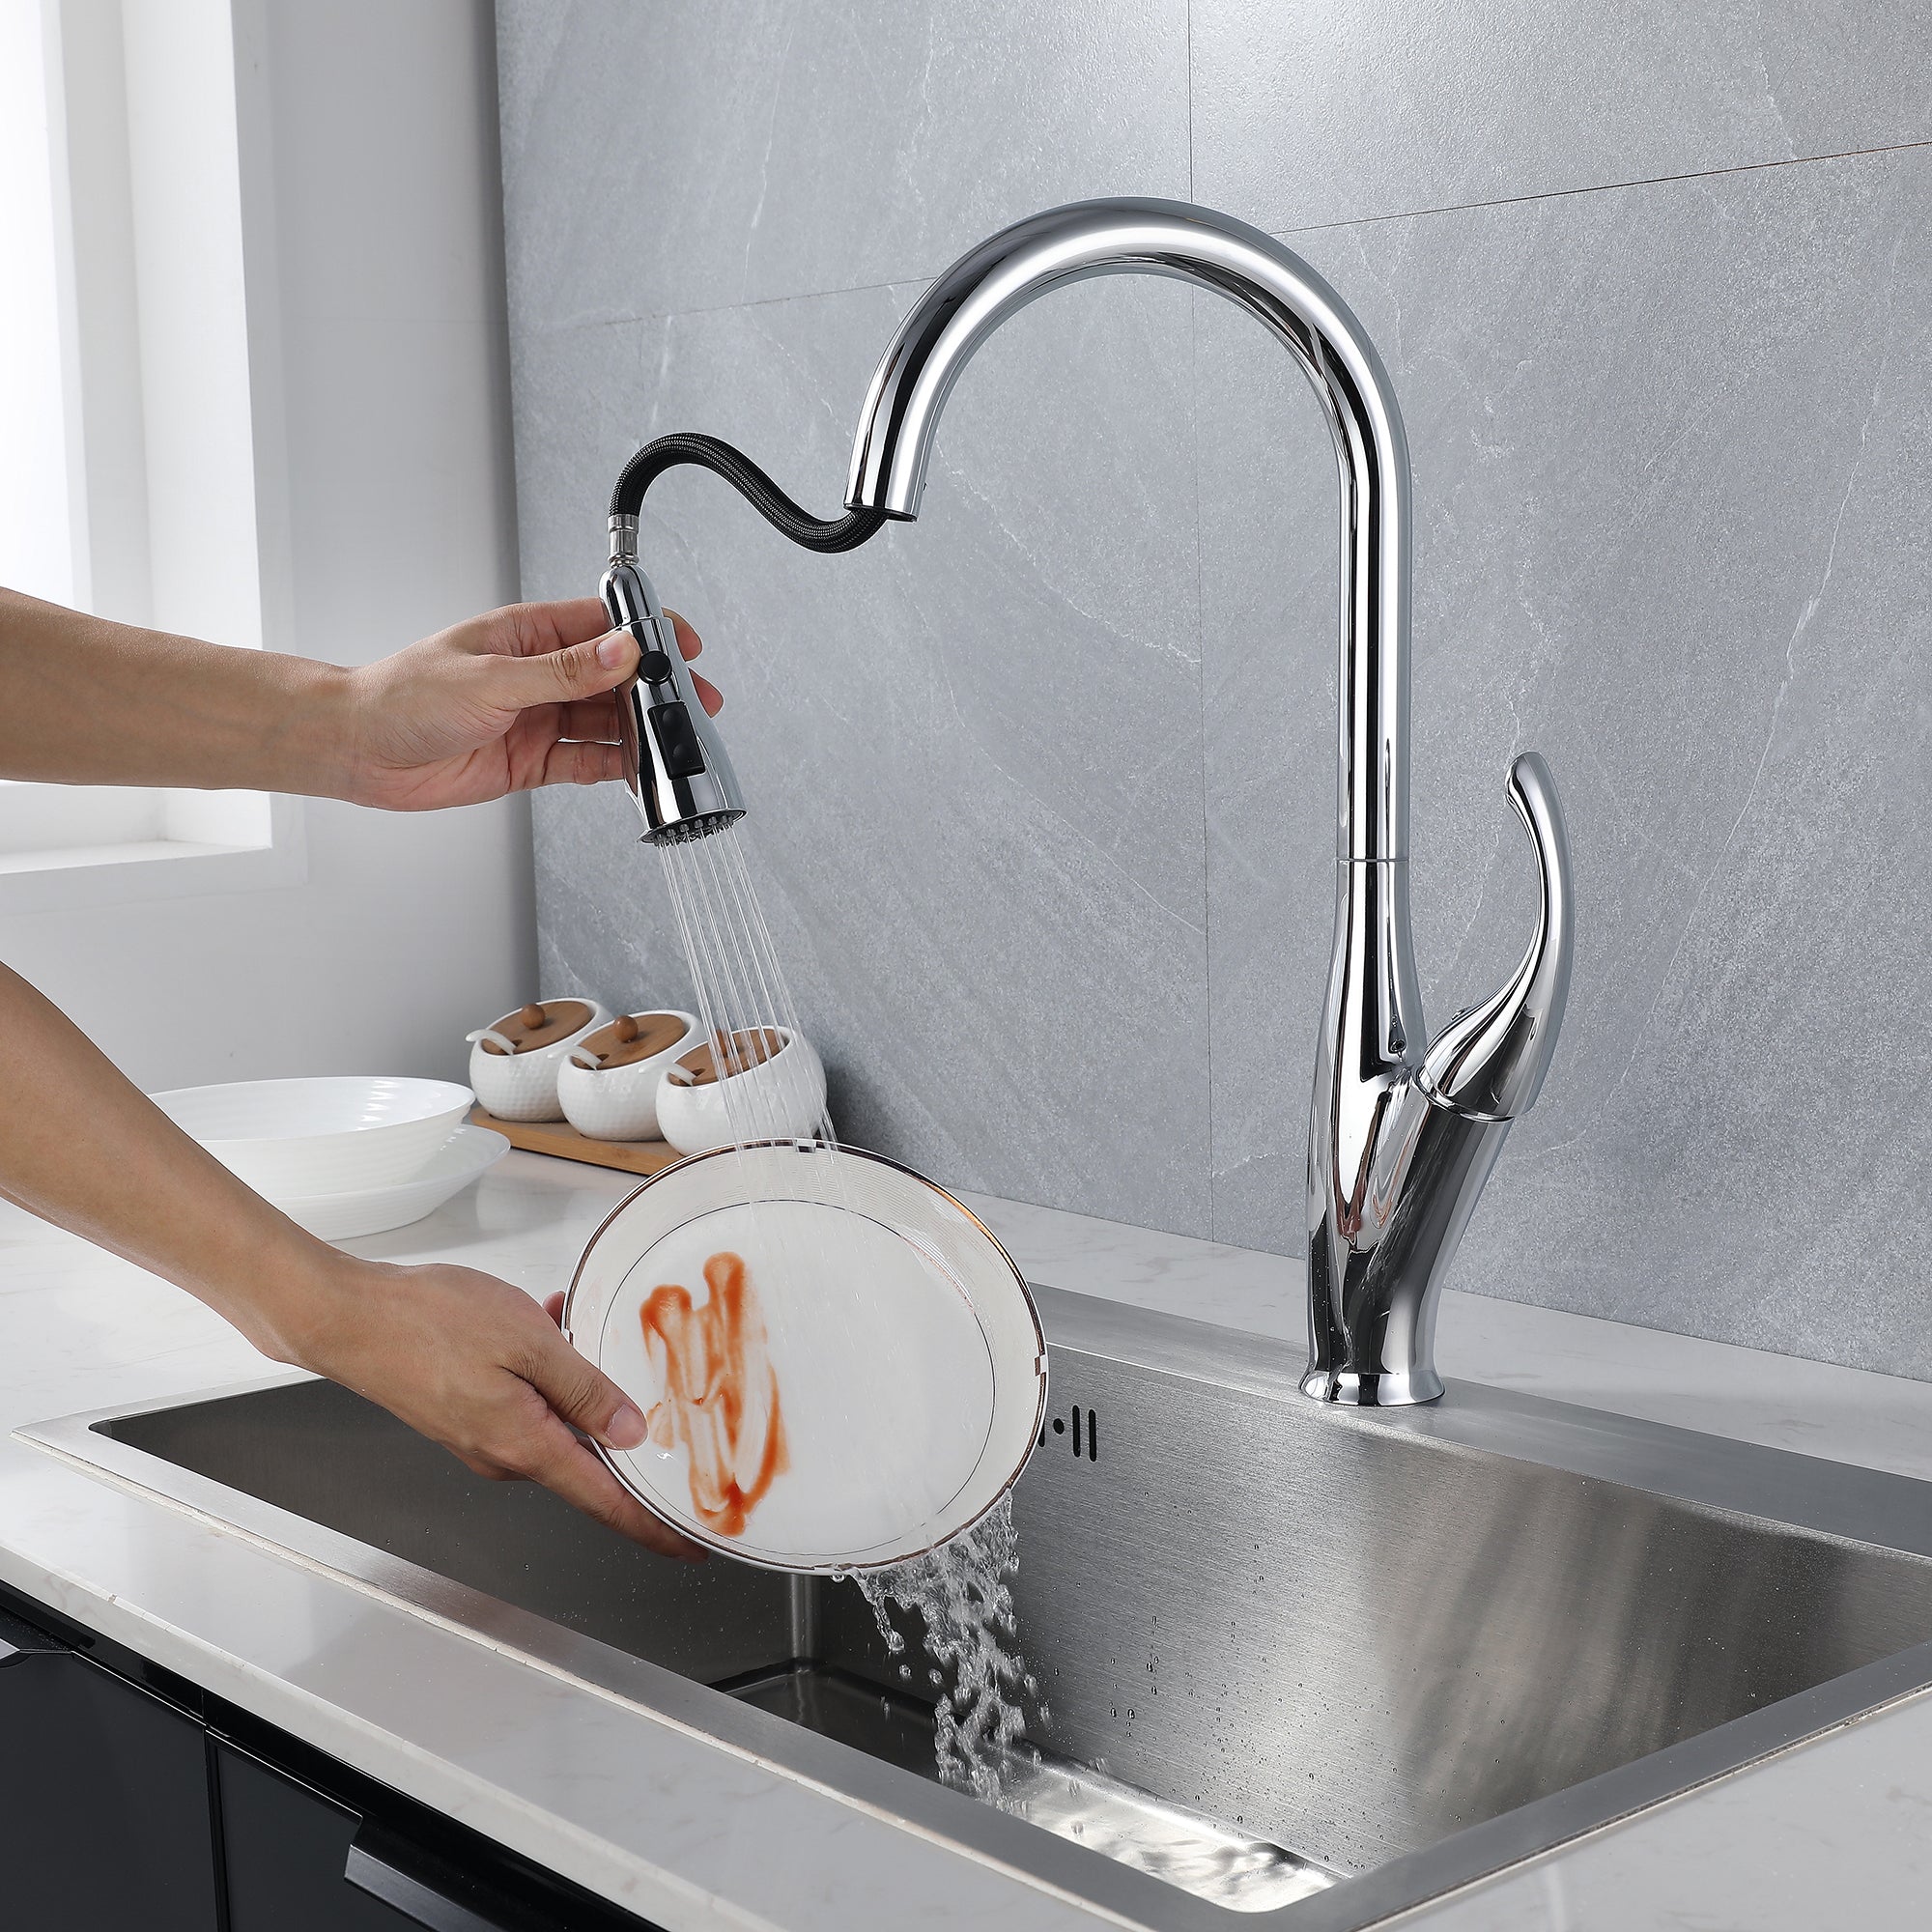 High Arc Single Handle Kitchen Sink Faucet with Pull Down Sprayer in Chrome